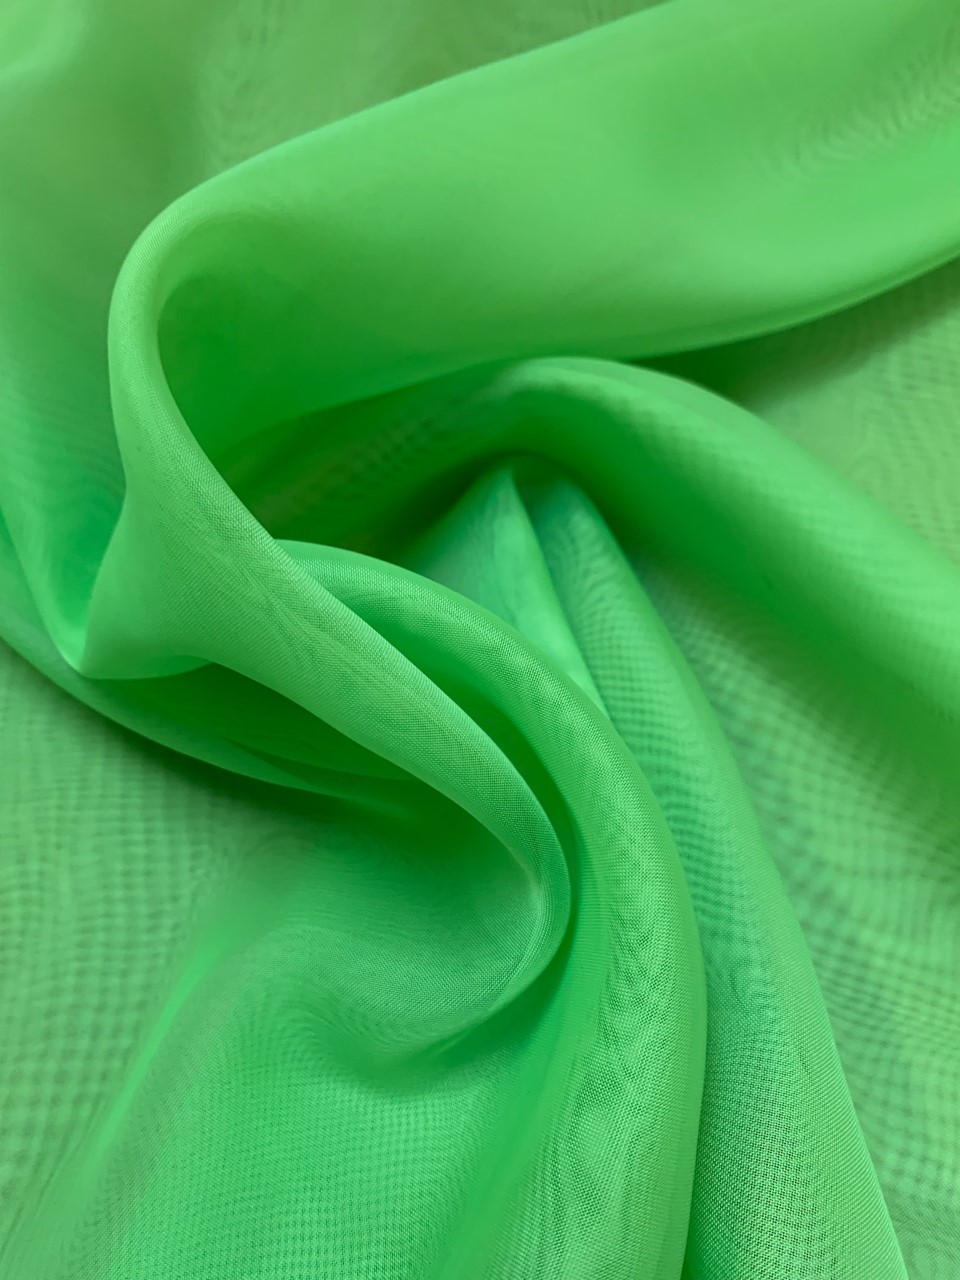 118" Apple Green Voile Fabric By The Yard